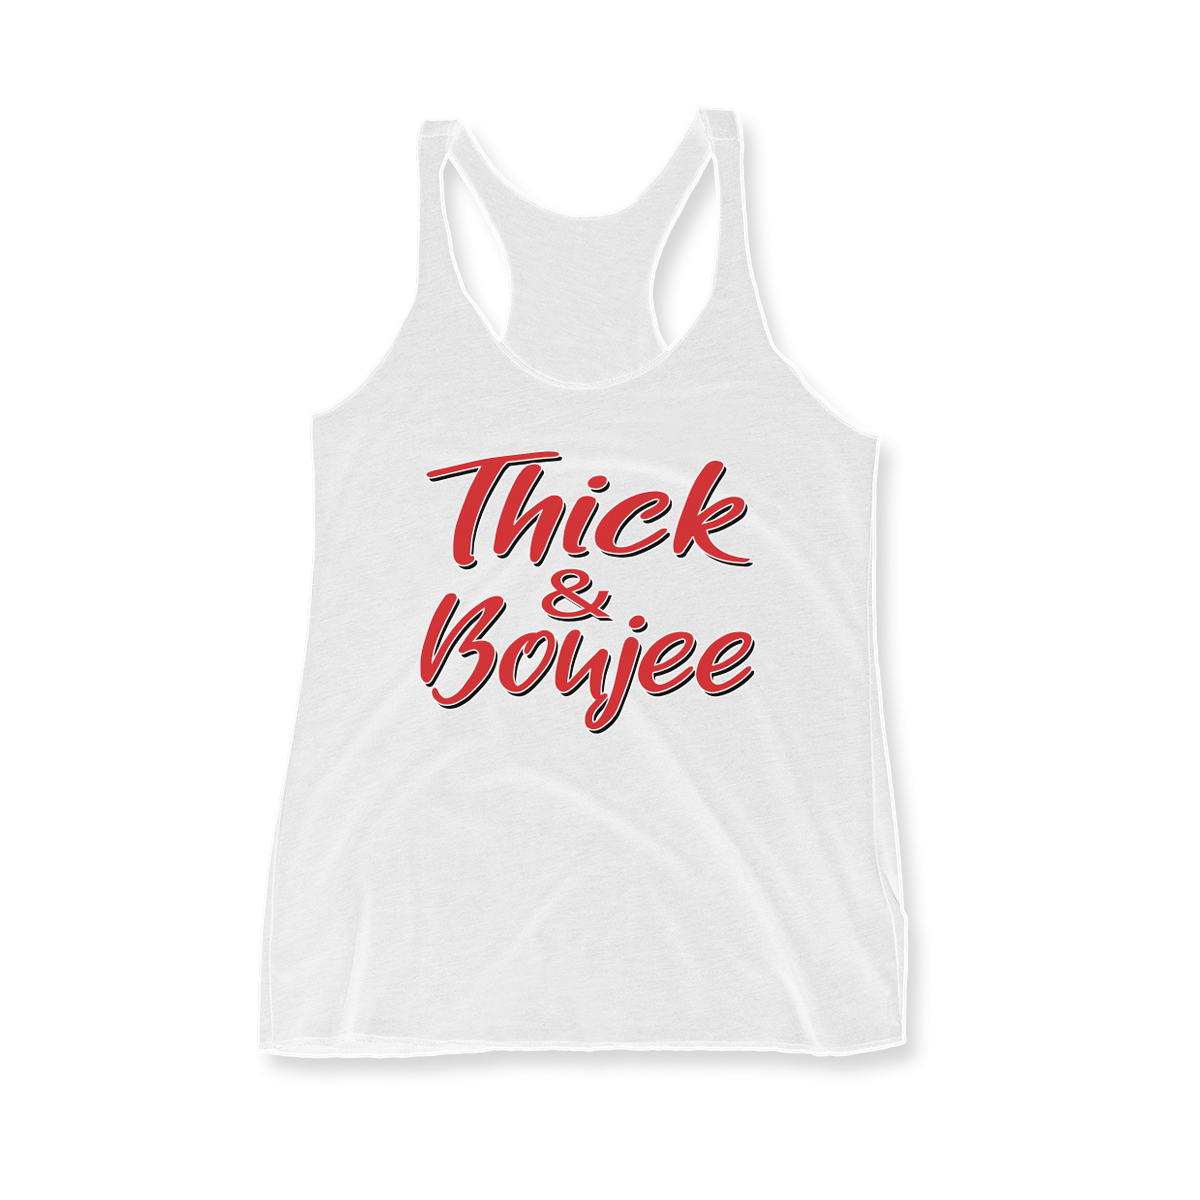 Thick & Boujee in Red Women's Racerback Tank